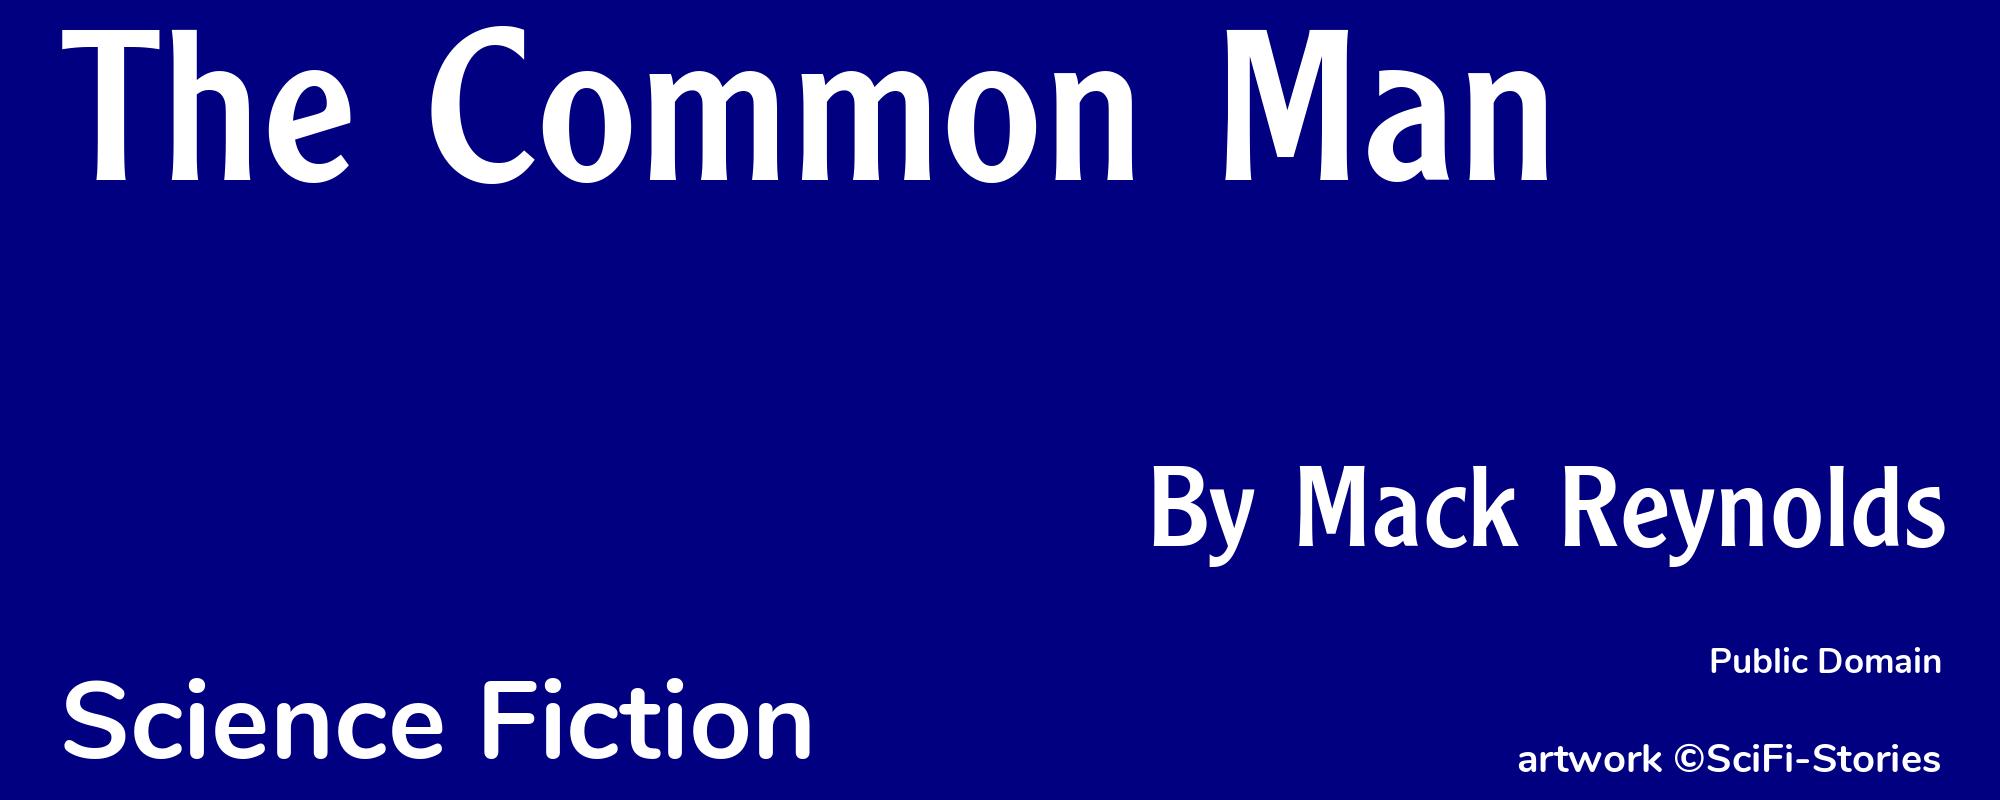 The Common Man - Cover